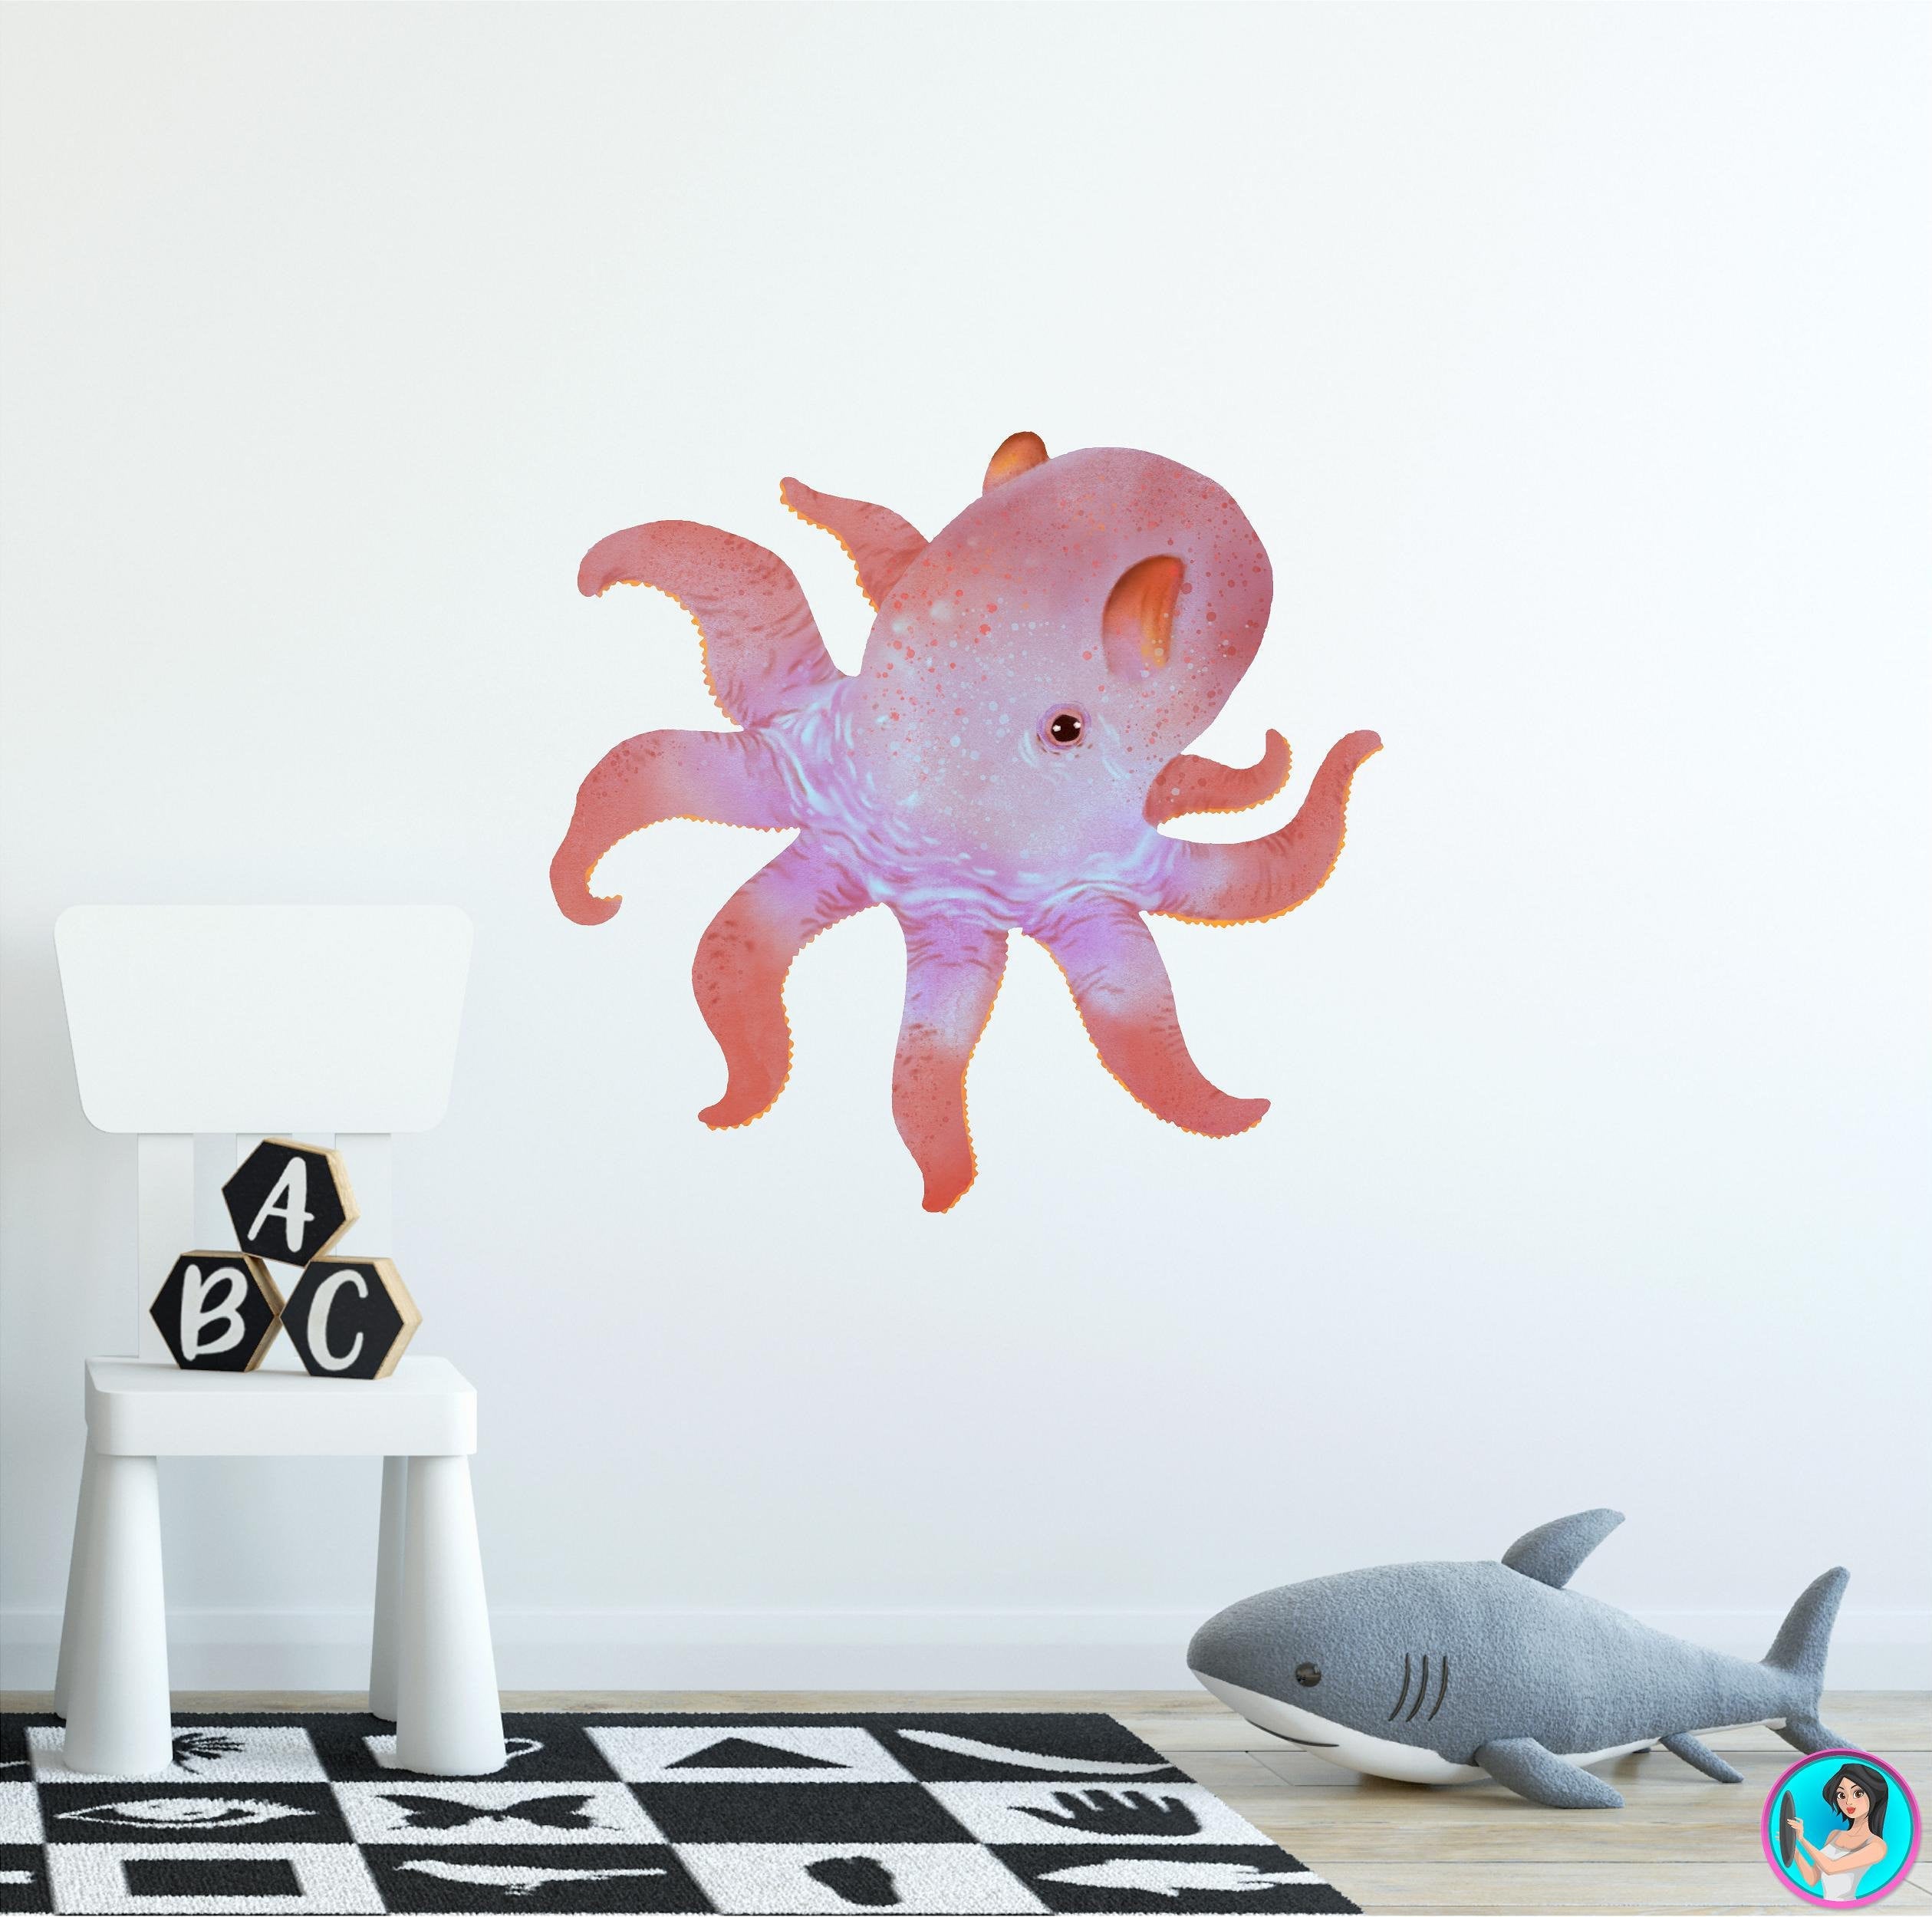 Dumbo Octopus Wall Decal Removable Fabric Vinyl Cute Sea Animal Wall Sticker